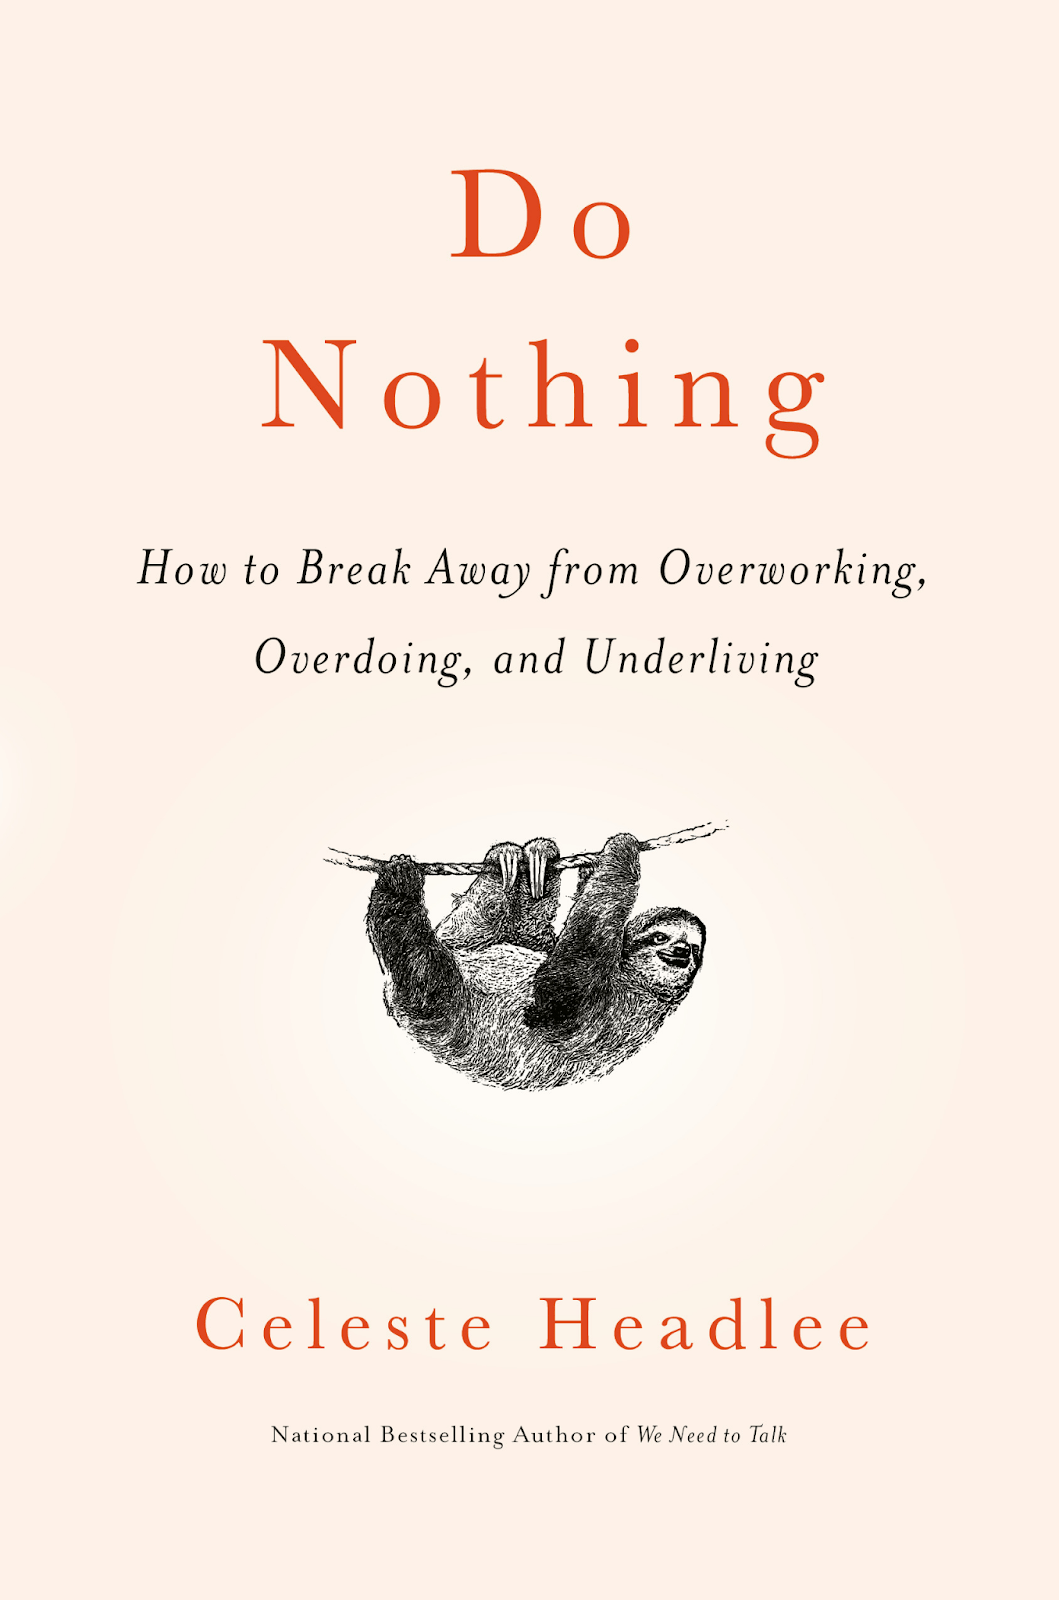 Do Nothing: How to Break Away from Overworking, Overdoing, and Underliving by Celeste Headlee Book Cover 